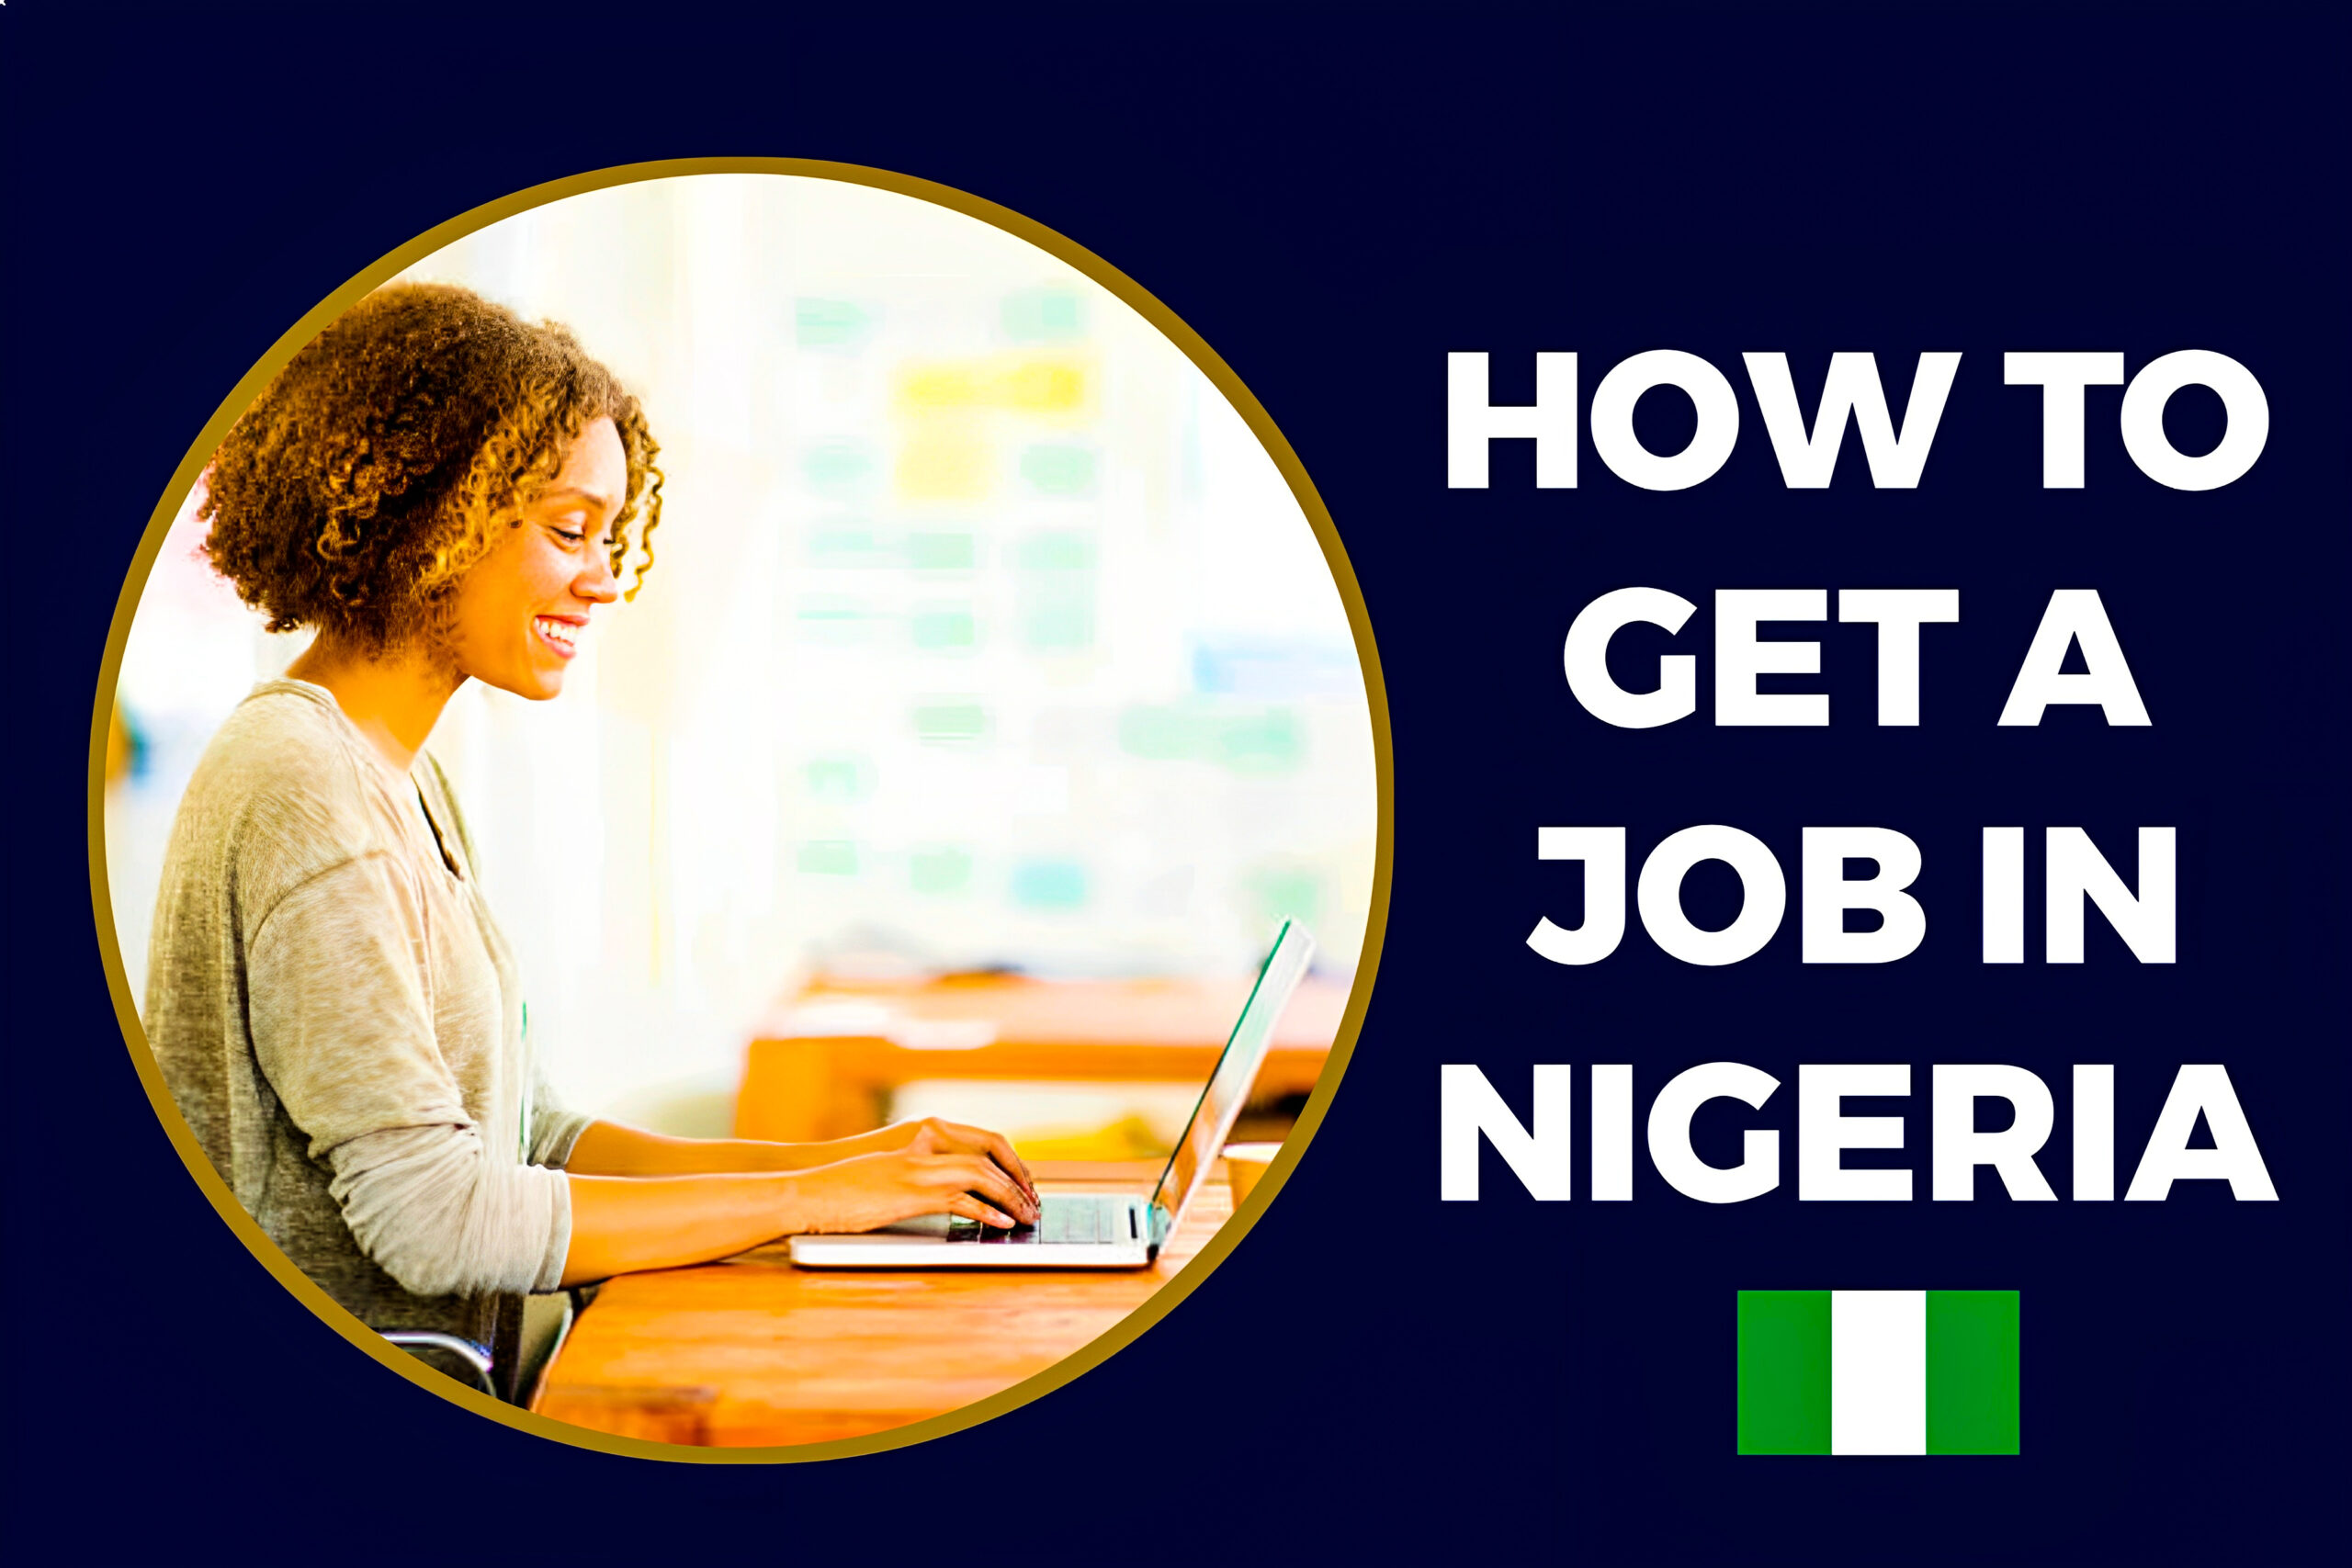 How To Get A Job In Nigeria - 3 solutions to finding a job in Nigeria